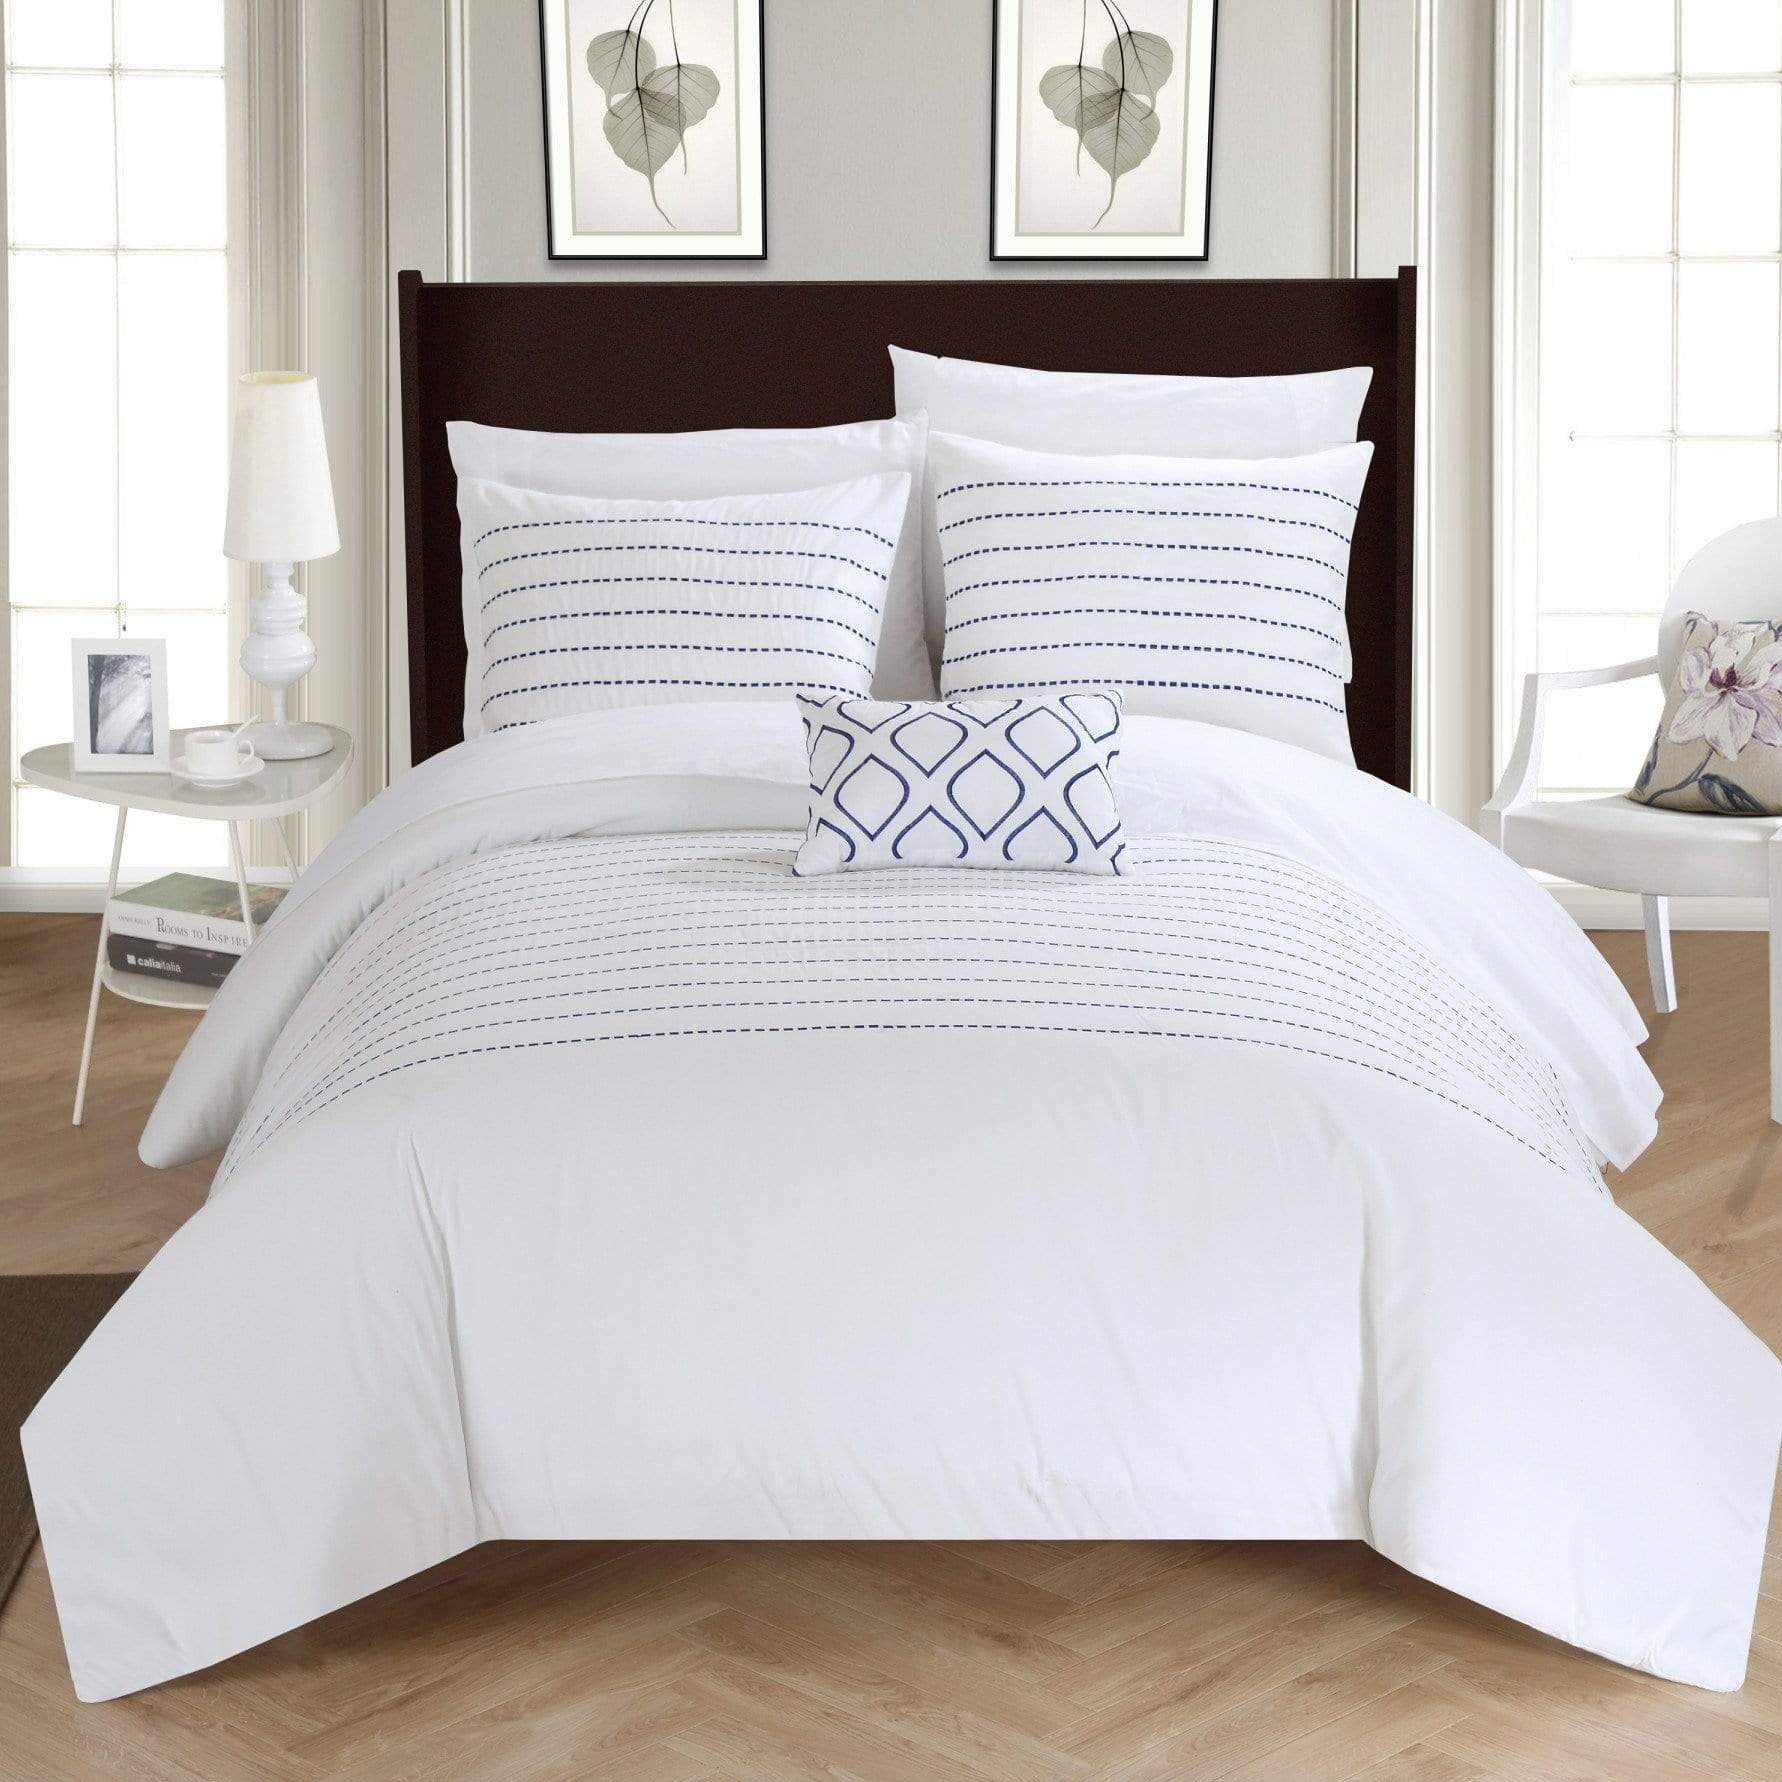 Bea 4 Piece Embroidered Duvet Cover Set